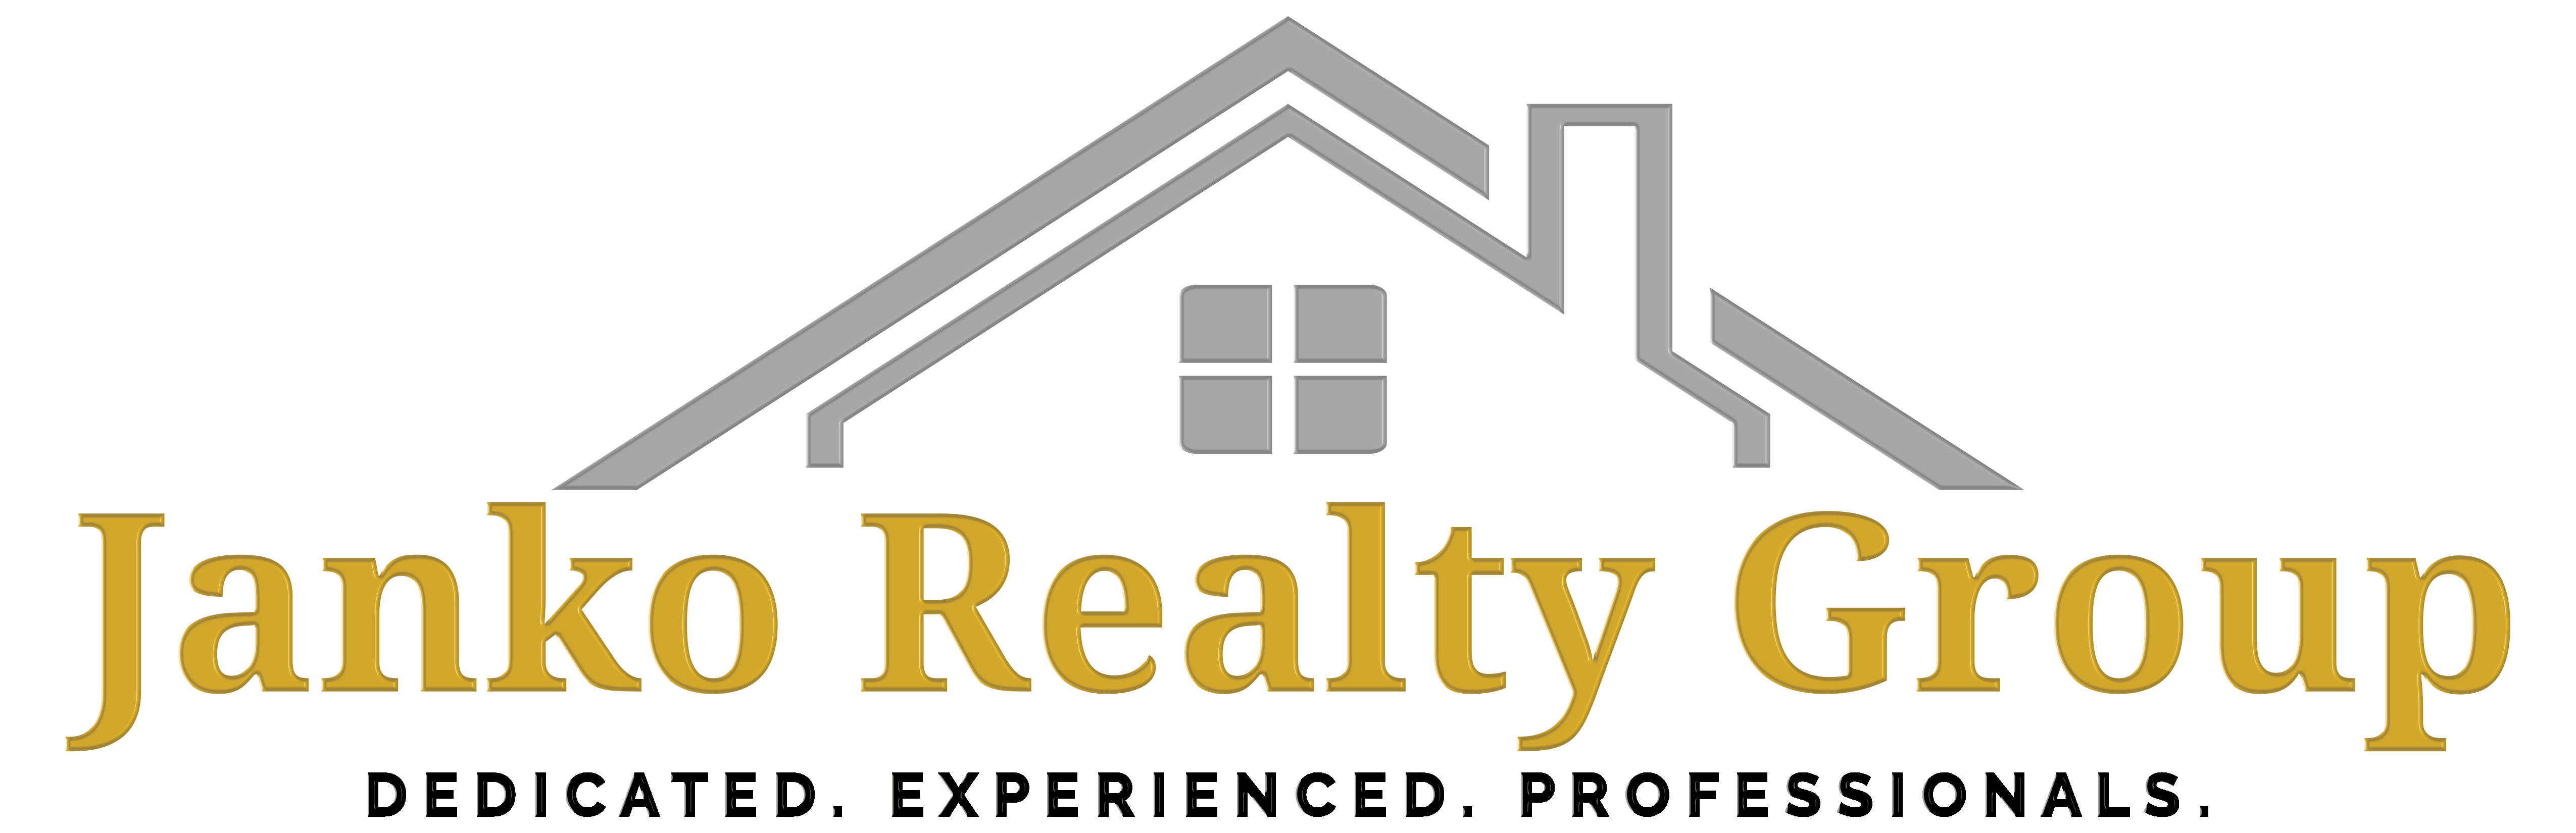 Janko Realty Group            